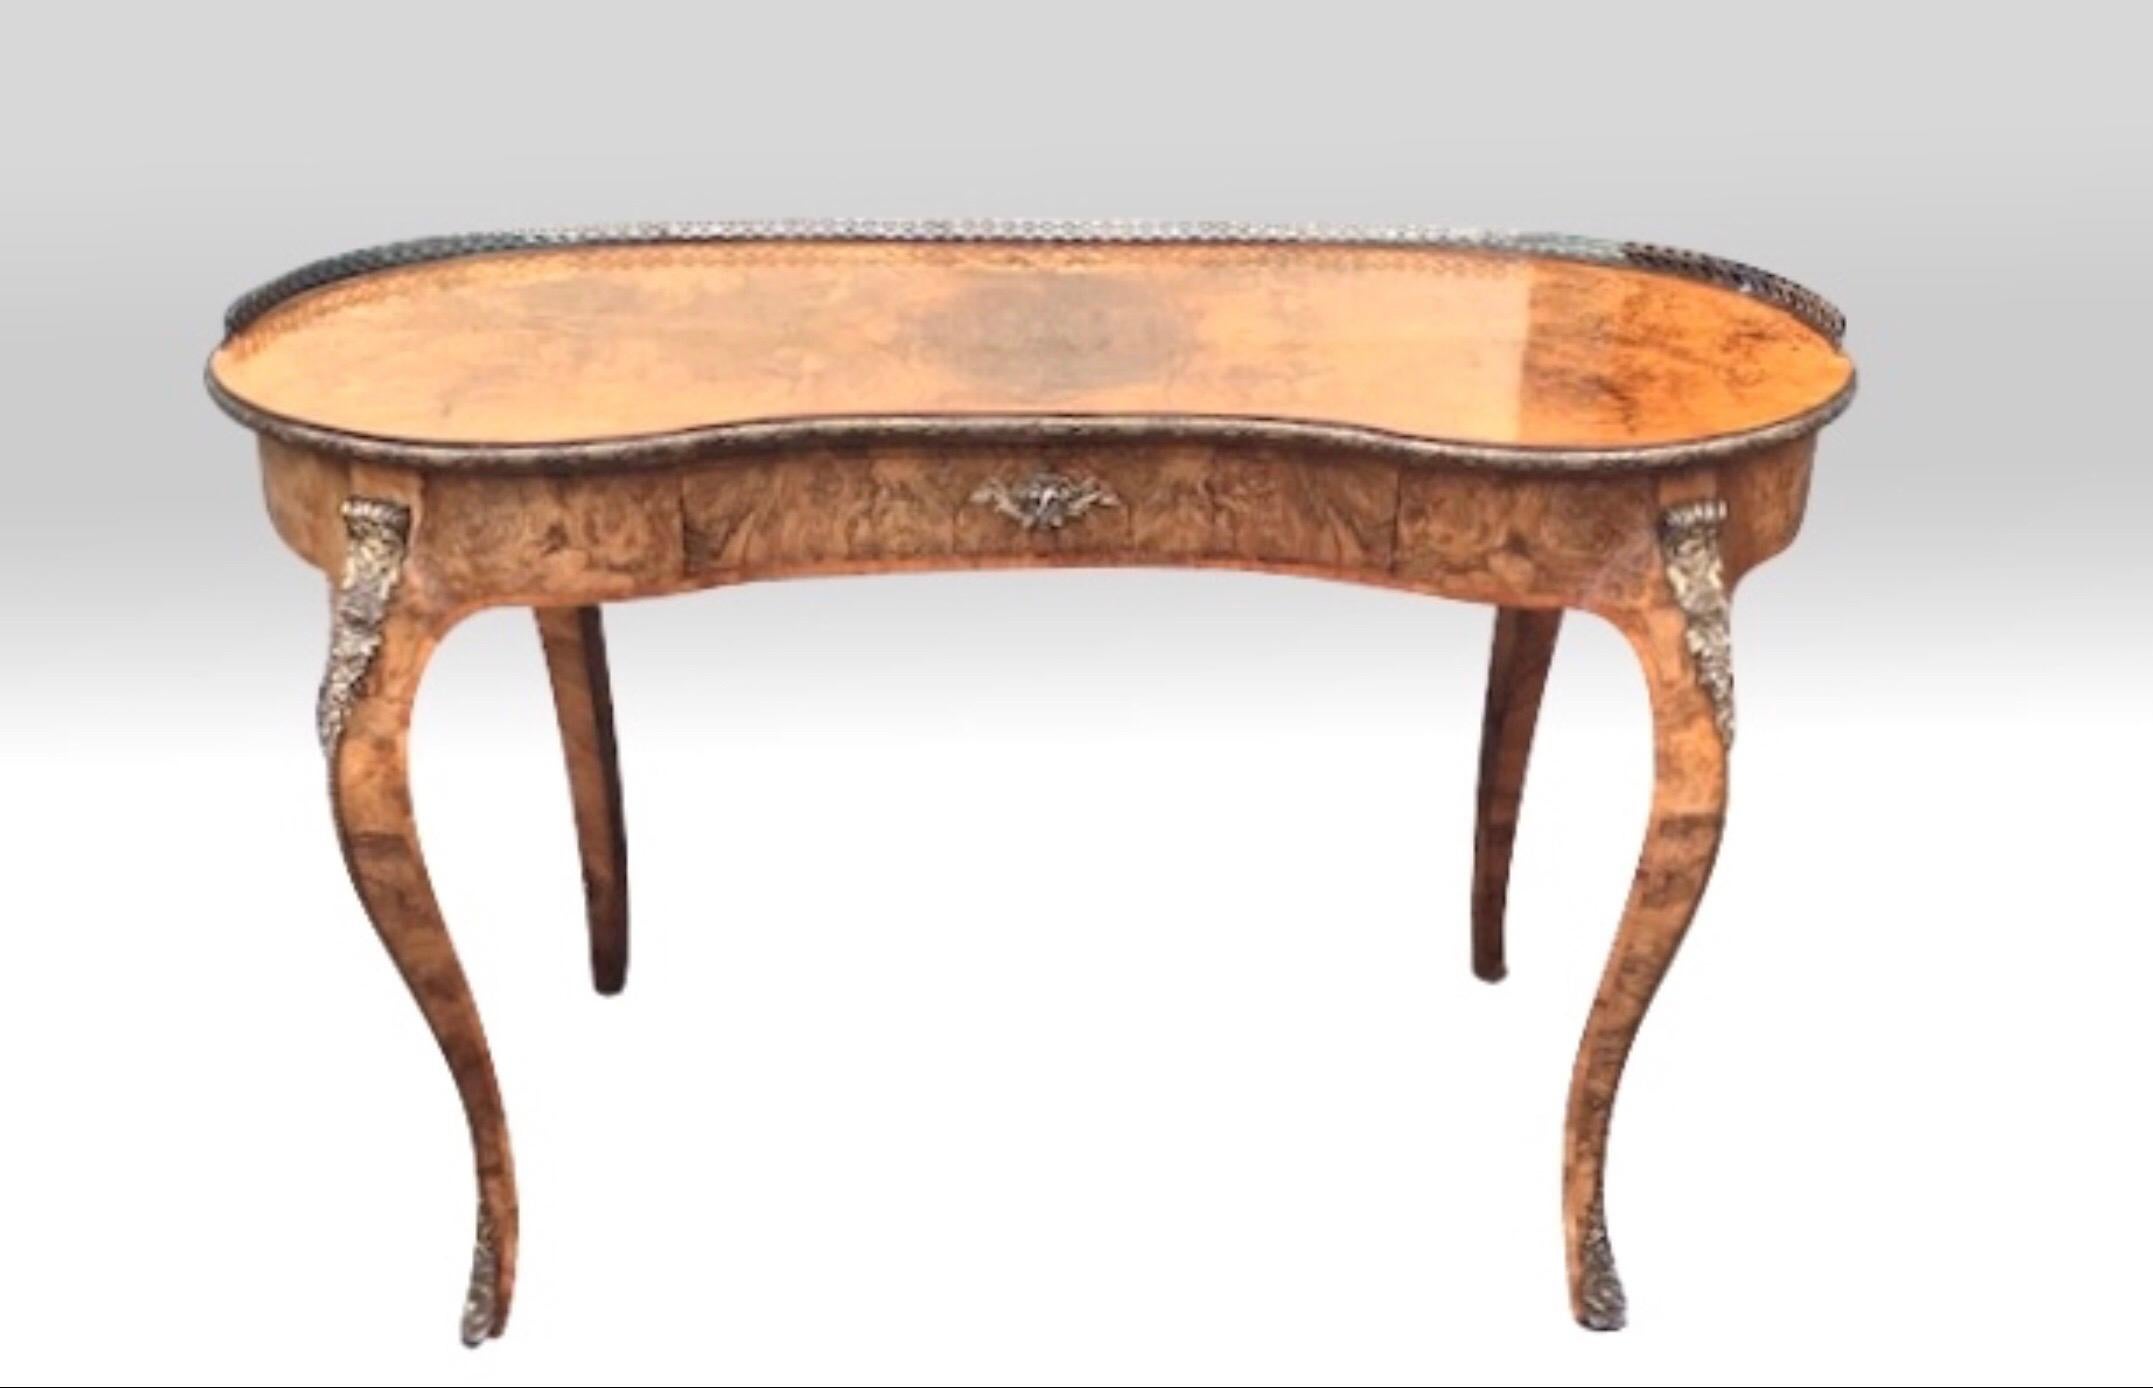 Super quality antique inlaid and marquetry burr walnut kidney shaped table desk
Surmounted with ormolu mounts and brass gallery
C1860
Measures: 44ins x 21ins x 28ins high
112cm x 53.25cm x 71cm.
 